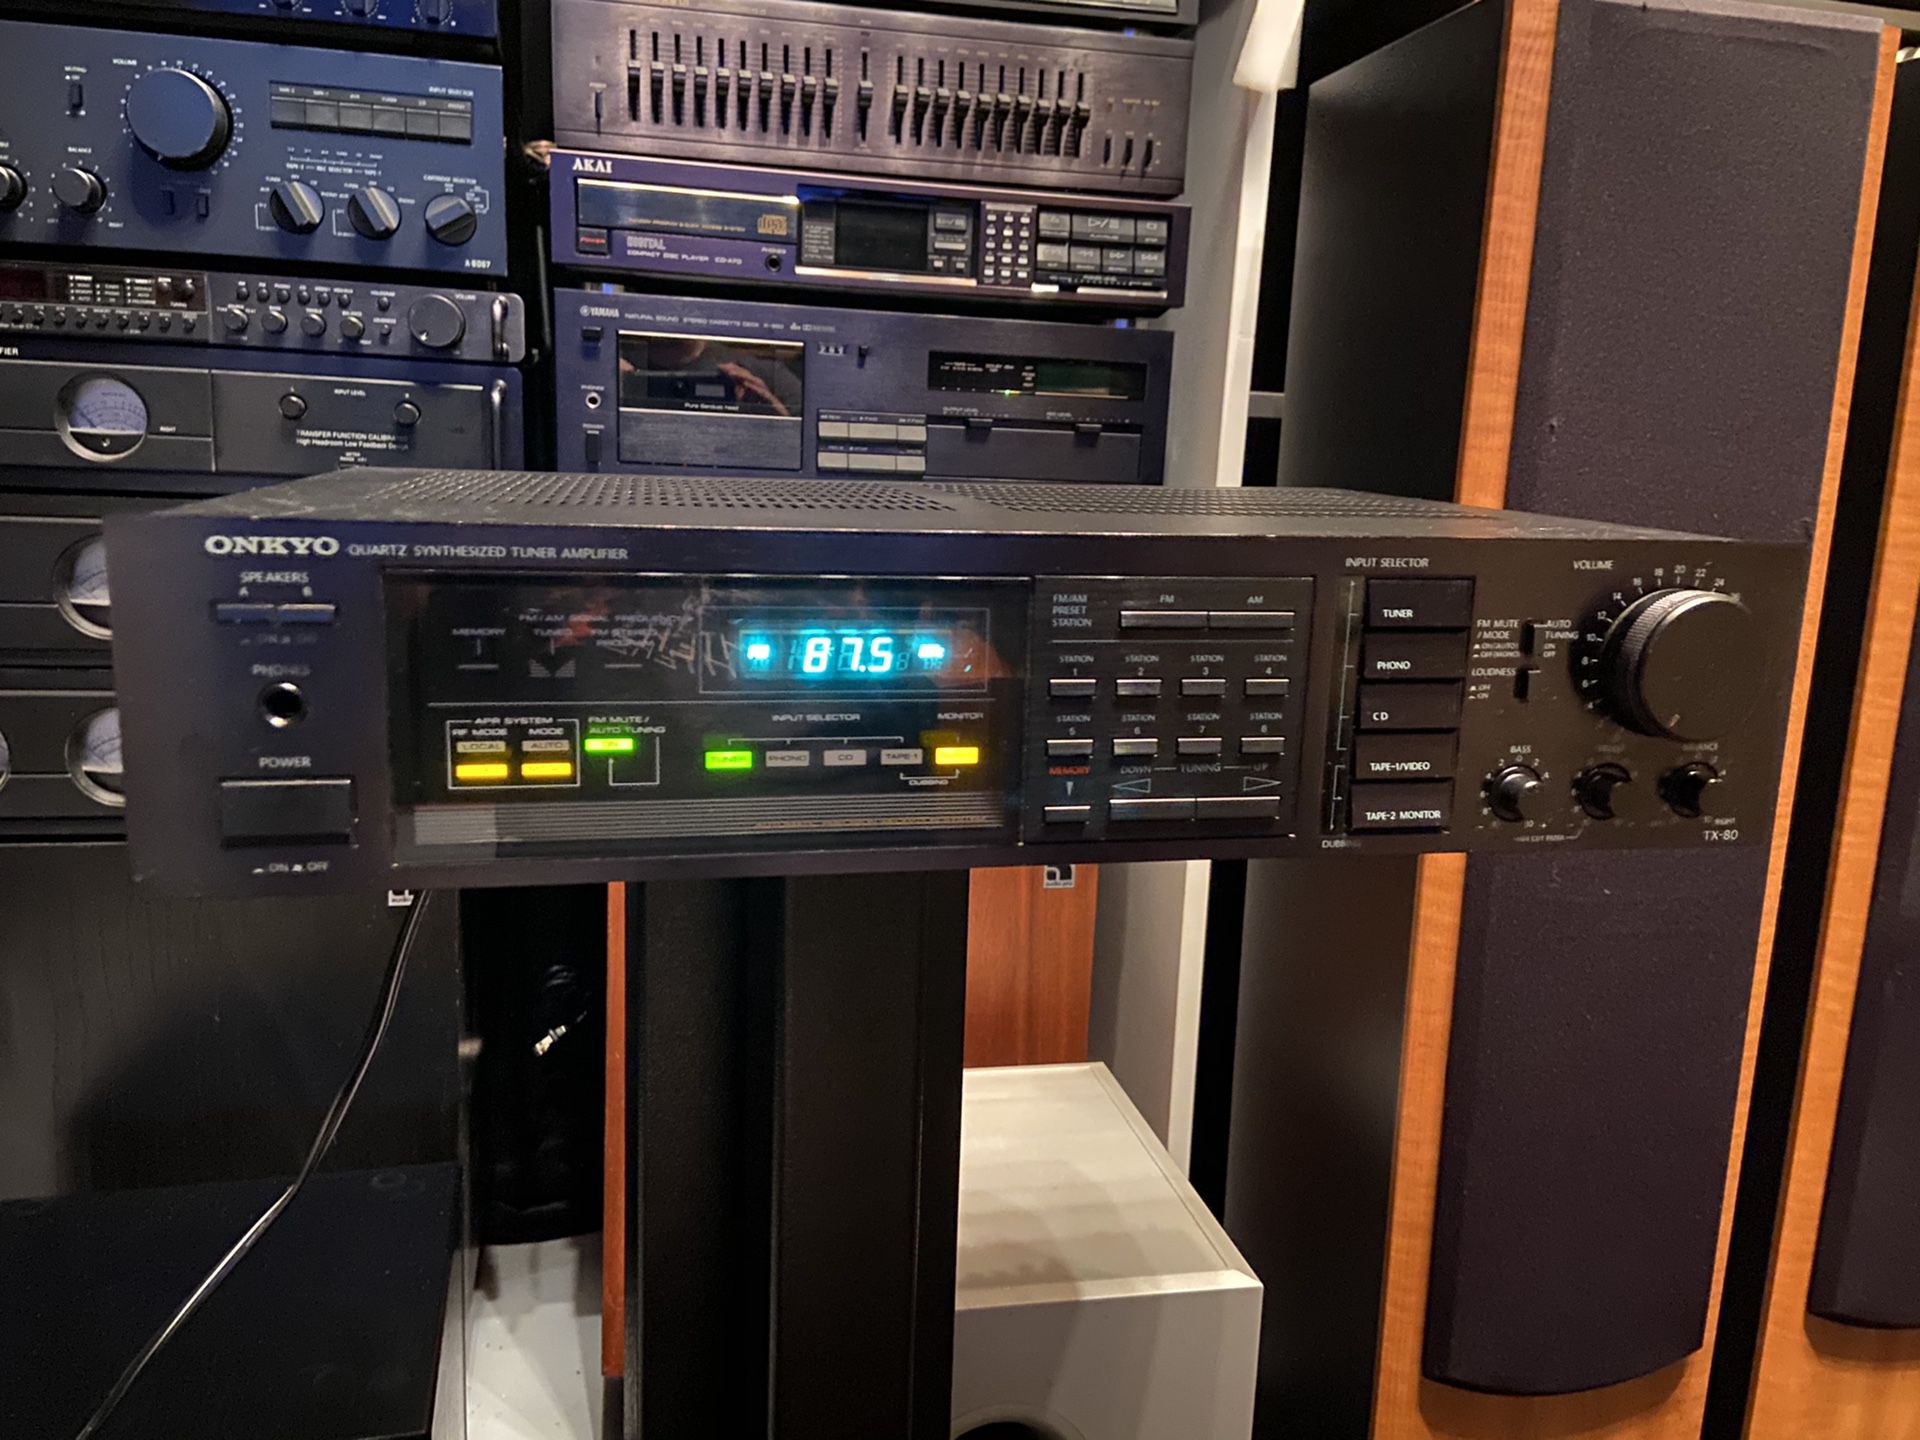 Onkyo TX-80 receiver in very nice condition